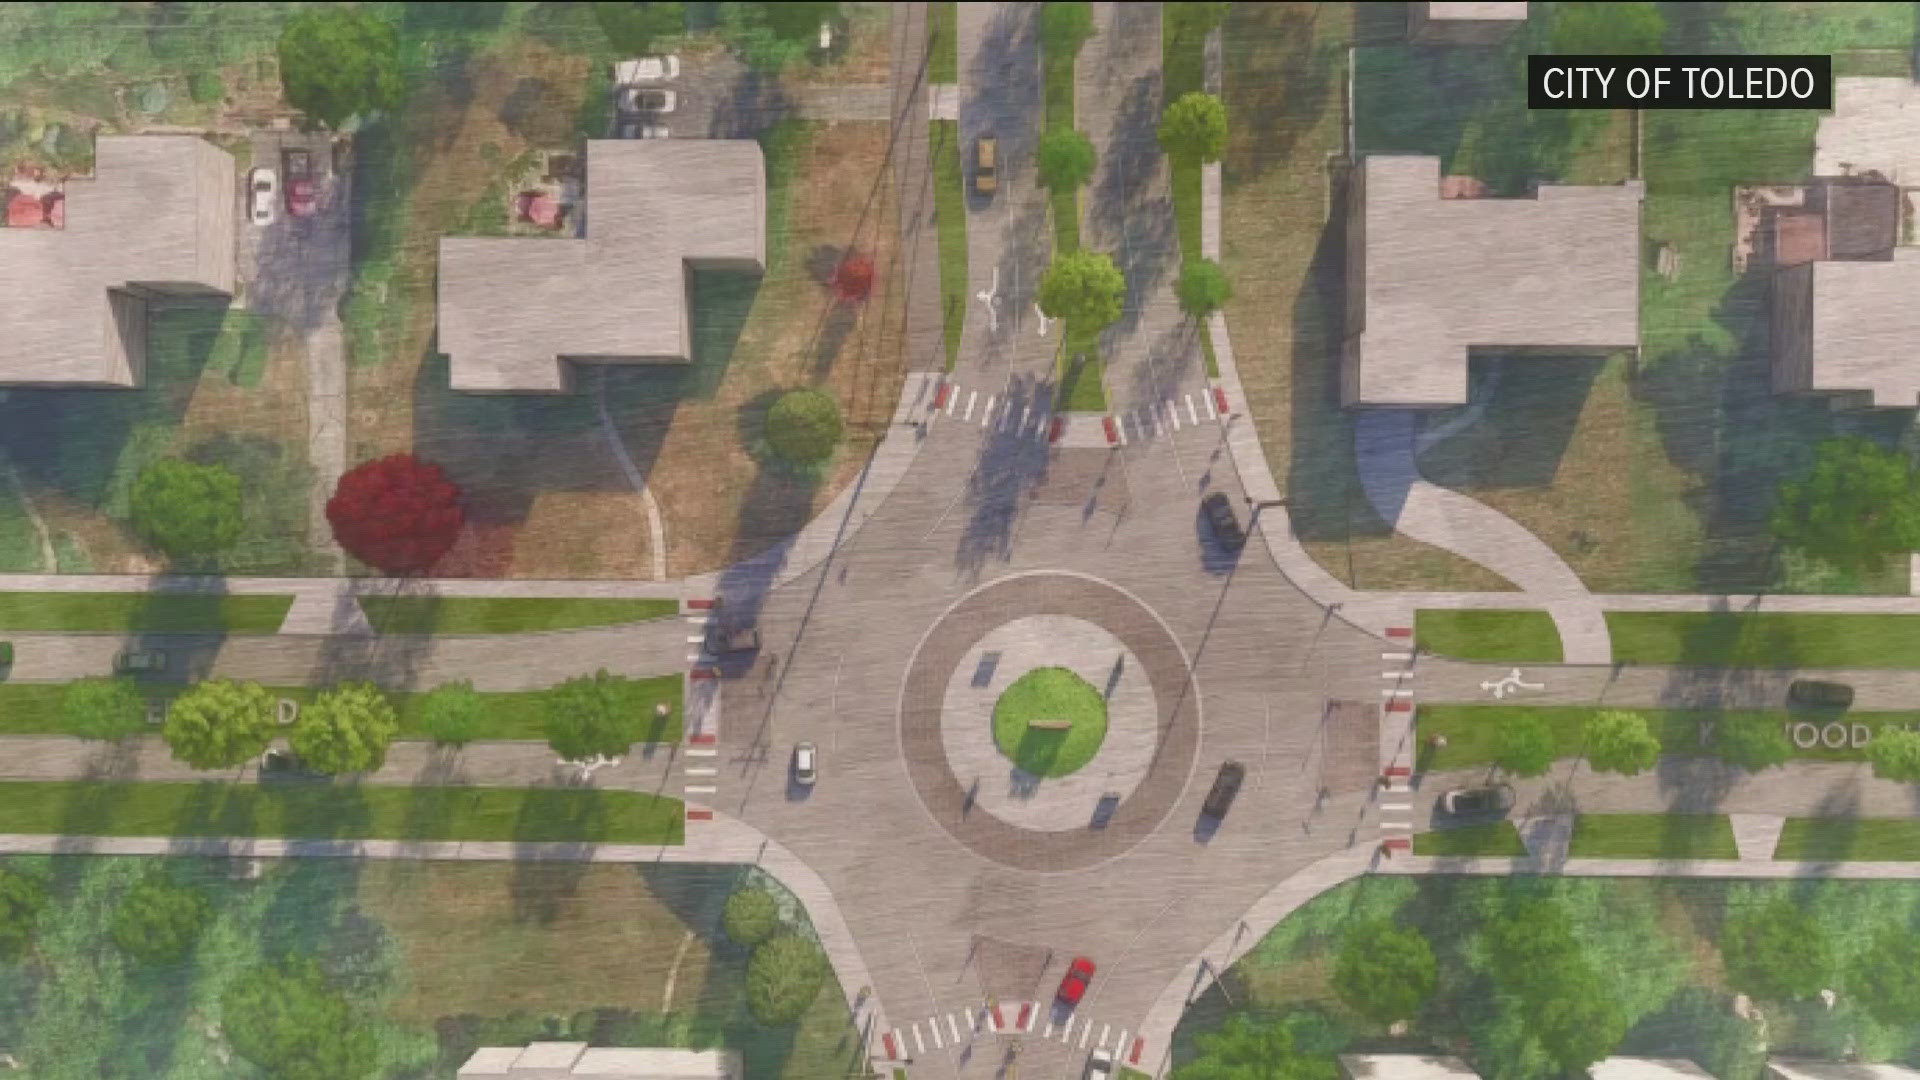 The roundabout would be built on Secor Road at Kenwood Boulevard. The city says the goal of the roundabout would be to slow traffic and reduce conflict points.